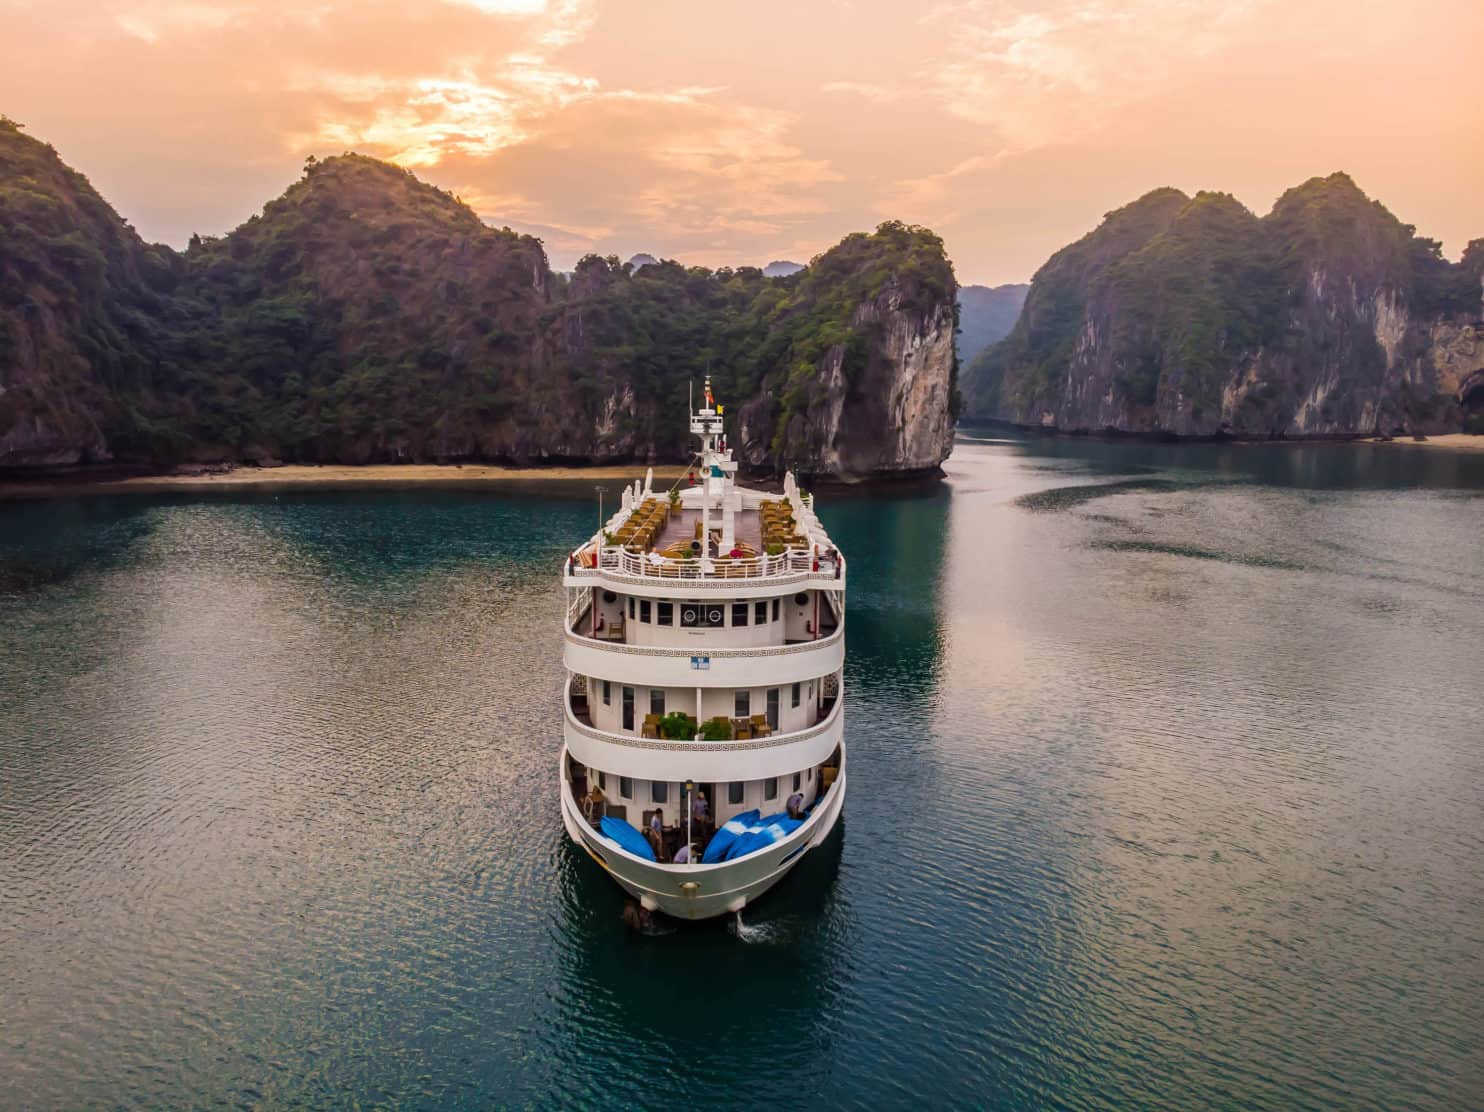 Halong Bay Cruise Tips To Know Before Your Trip to Vietnam